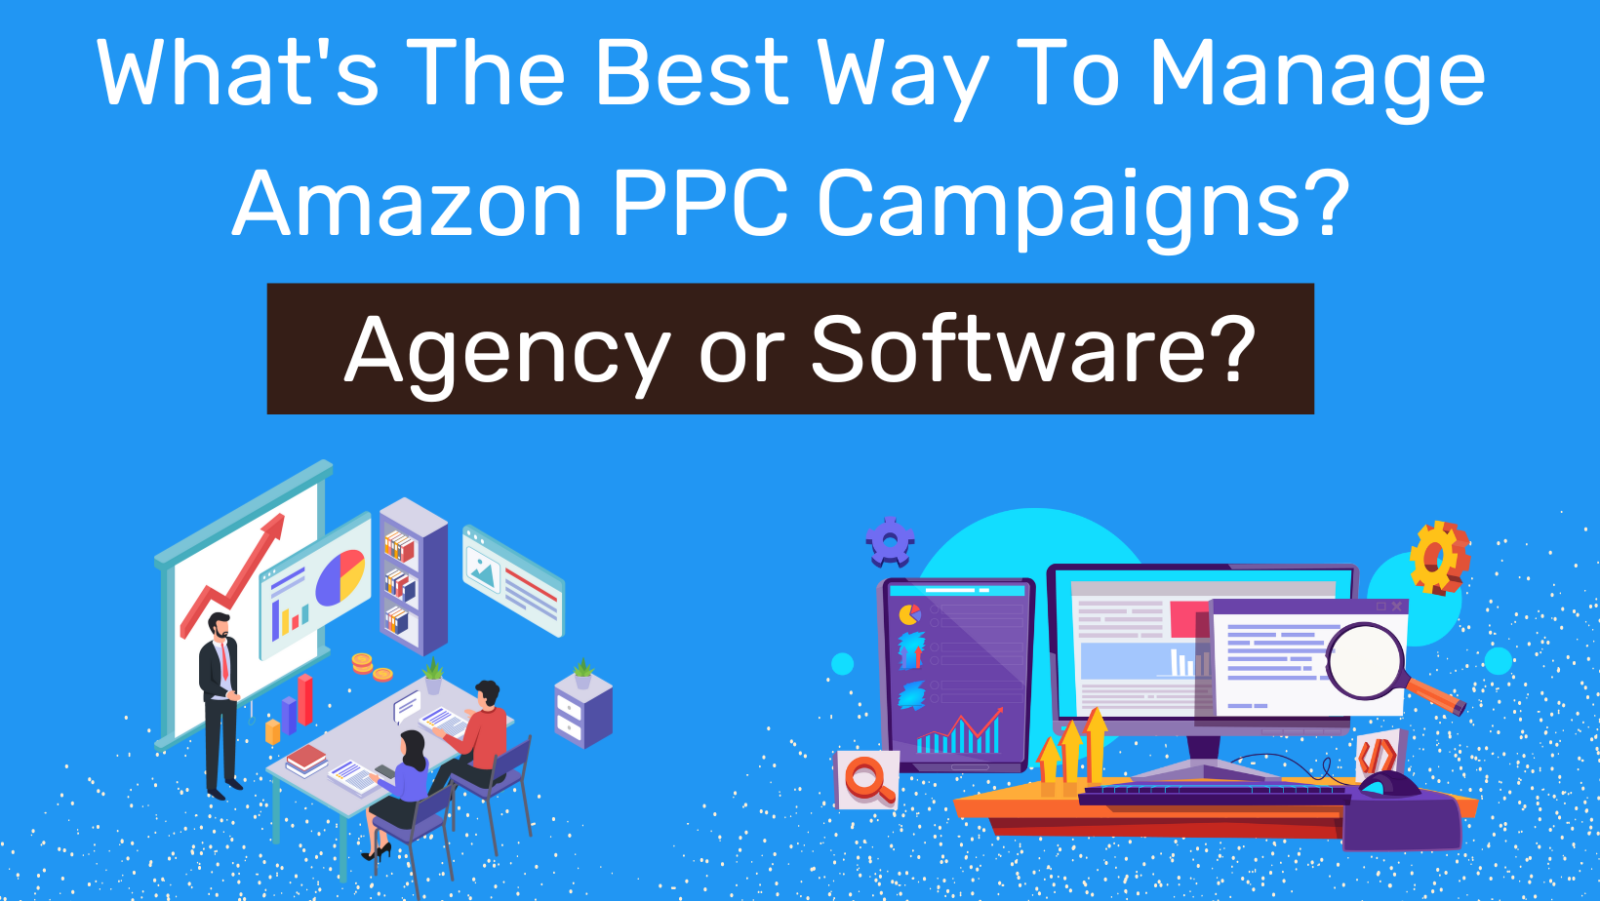 What's The Best Way To Manage Amazon PPC Campaigns